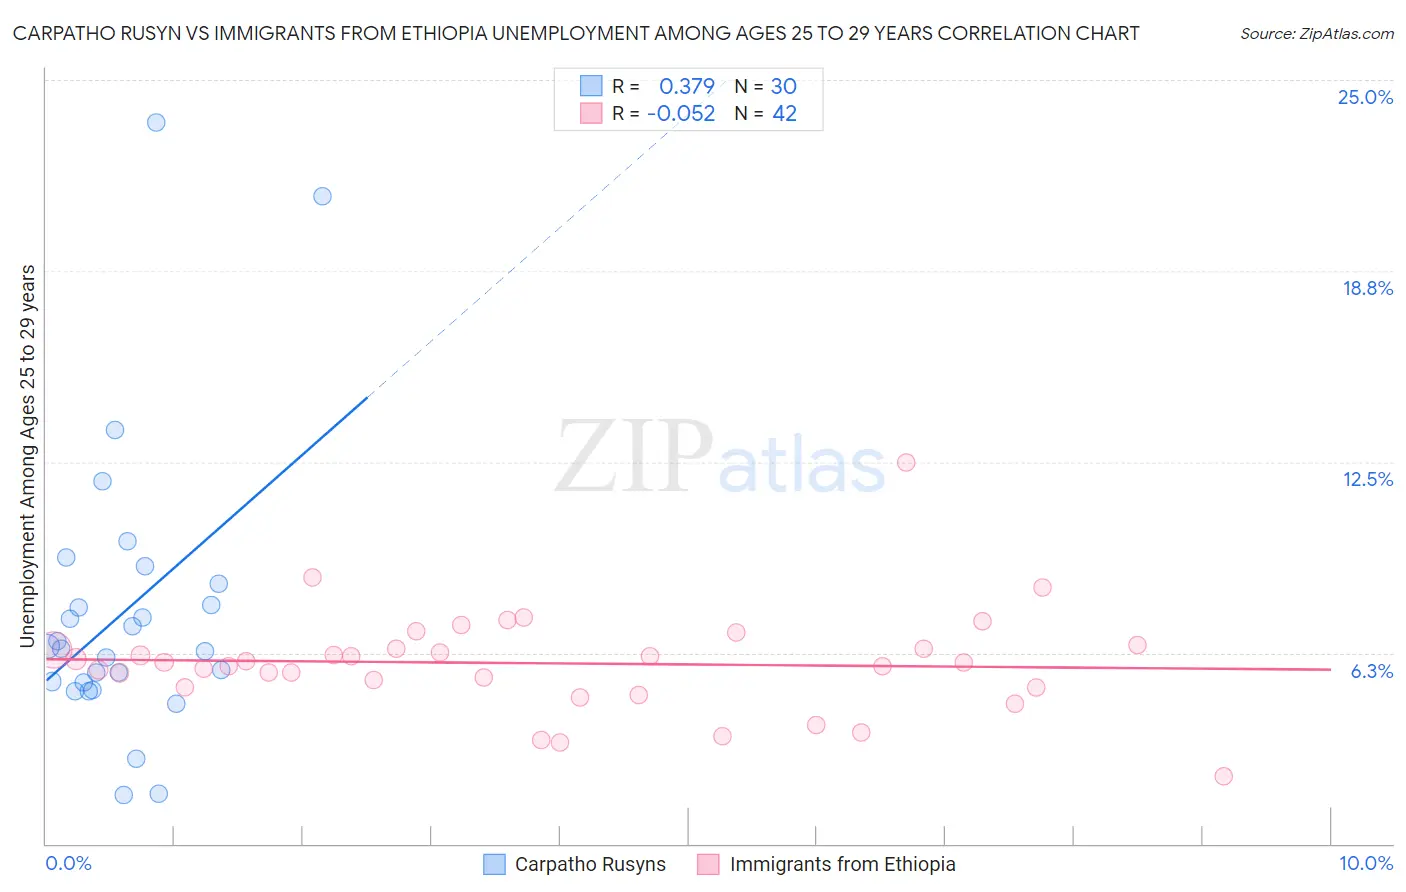 Carpatho Rusyn vs Immigrants from Ethiopia Unemployment Among Ages 25 to 29 years